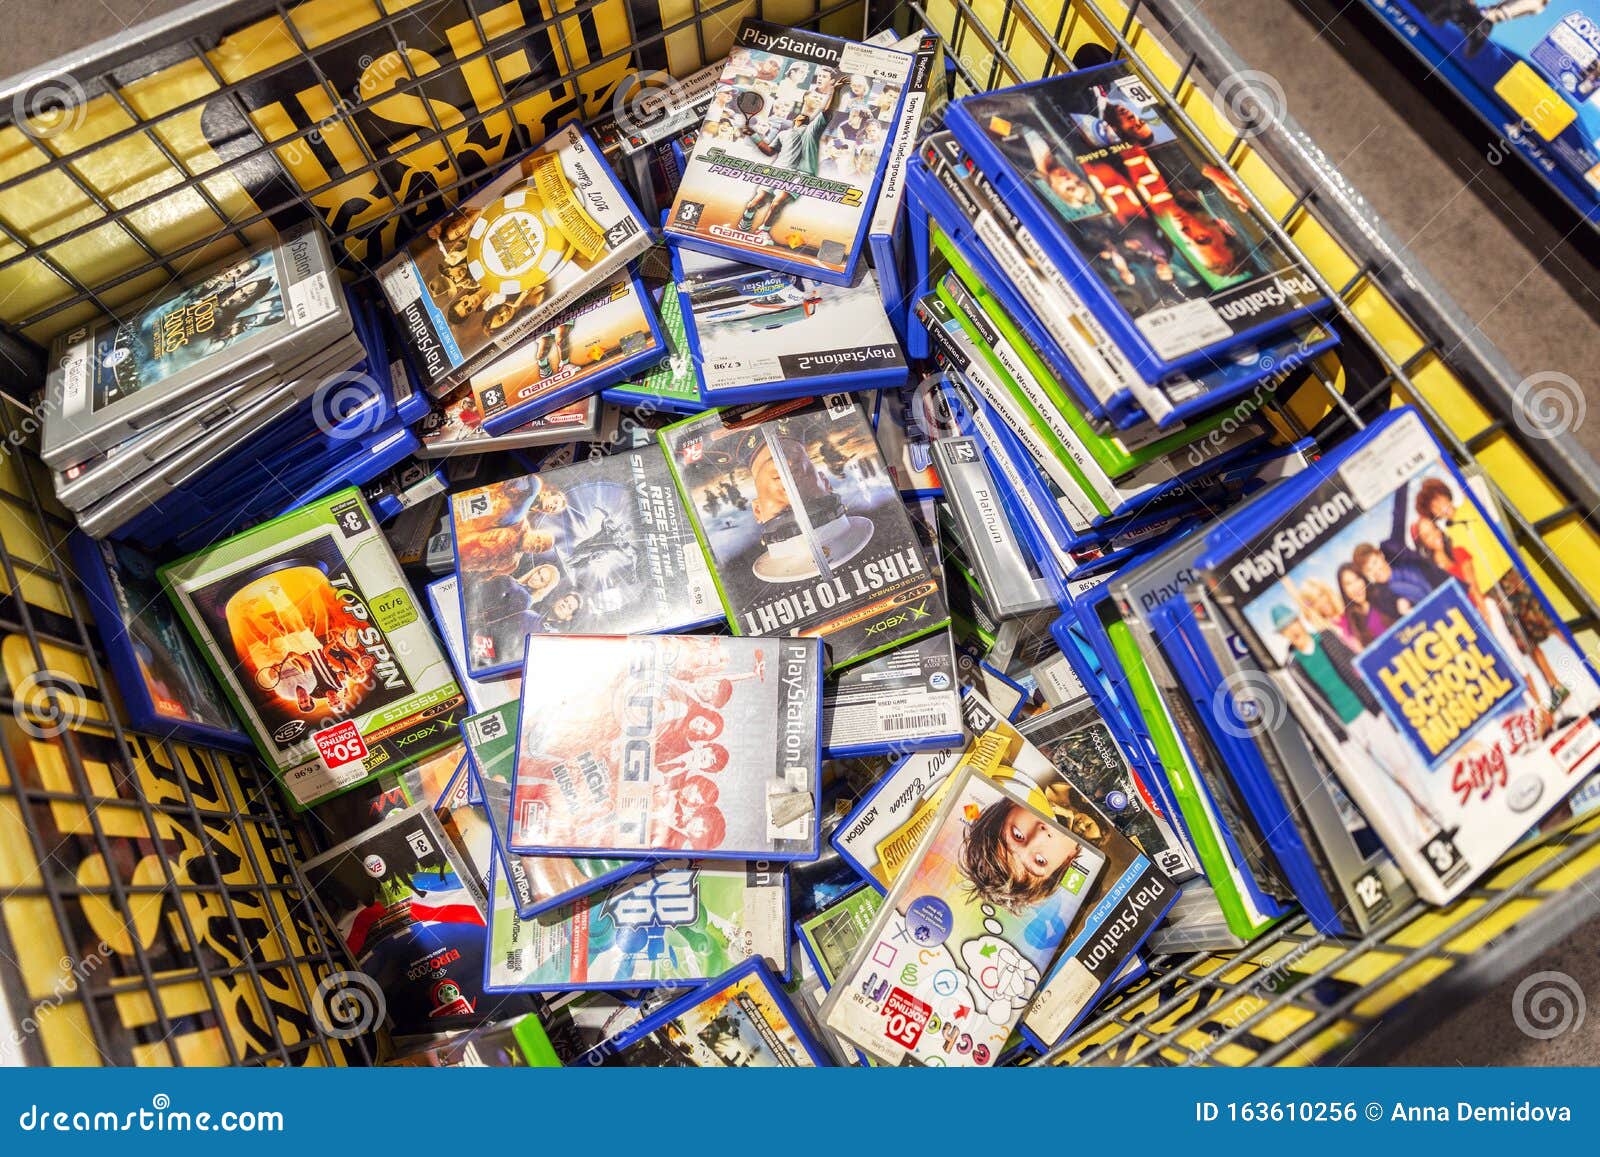 Netherlands, 10/11/2019: Assortment of Games in the Store Editorial Photo - Image of cover, 163610256